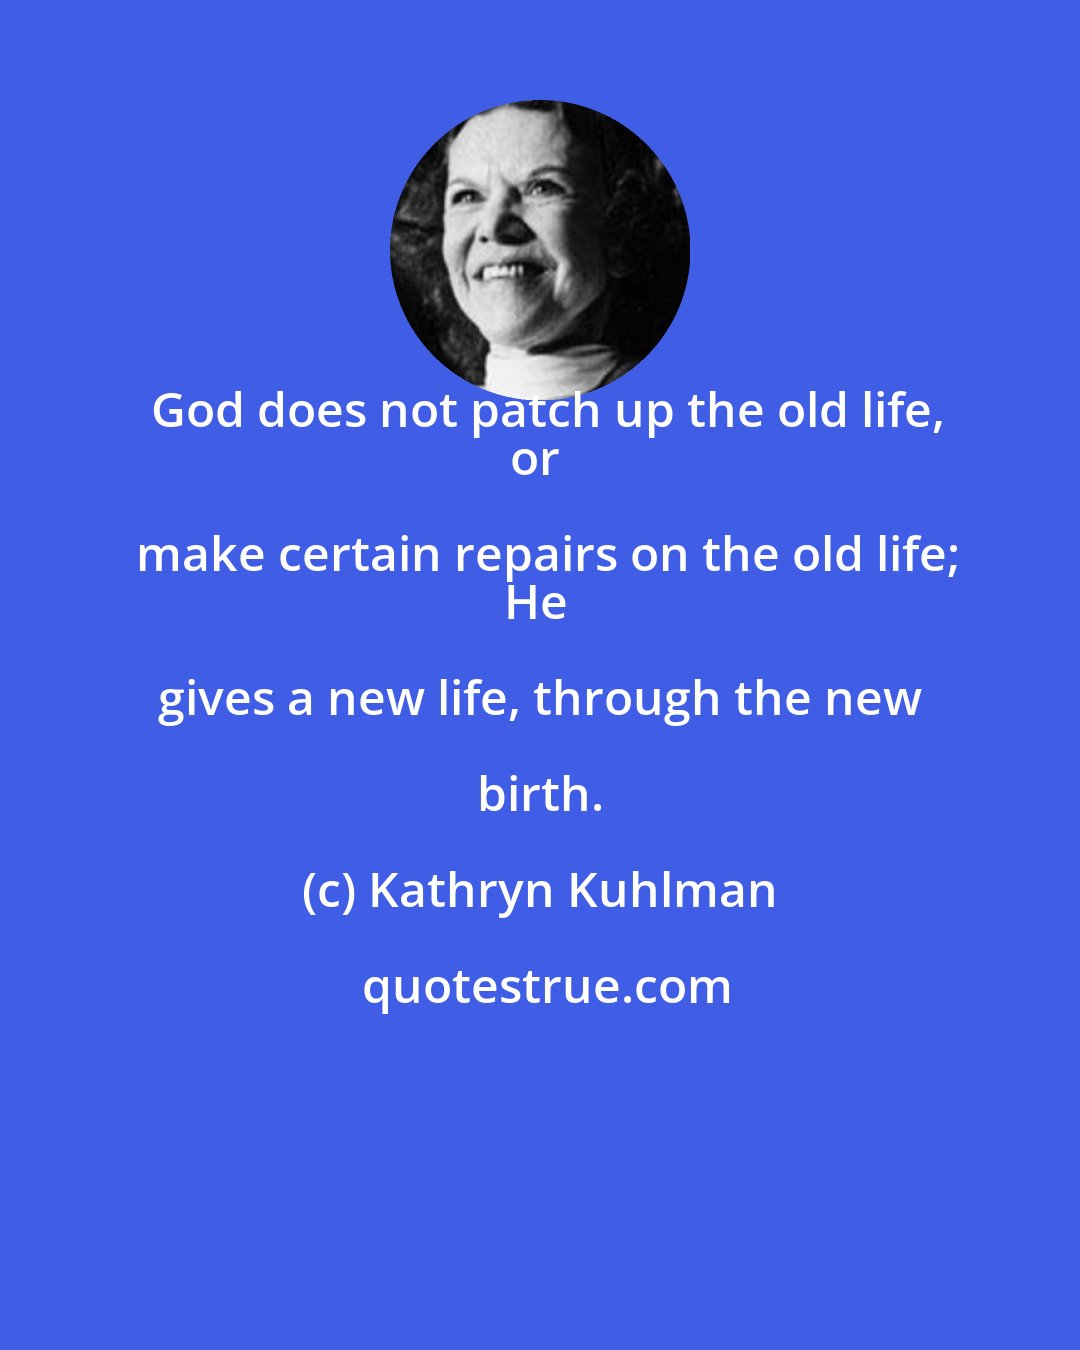 Kathryn Kuhlman: God does not patch up the old life,
or make certain repairs on the old life;
He gives a new life, through the new birth.